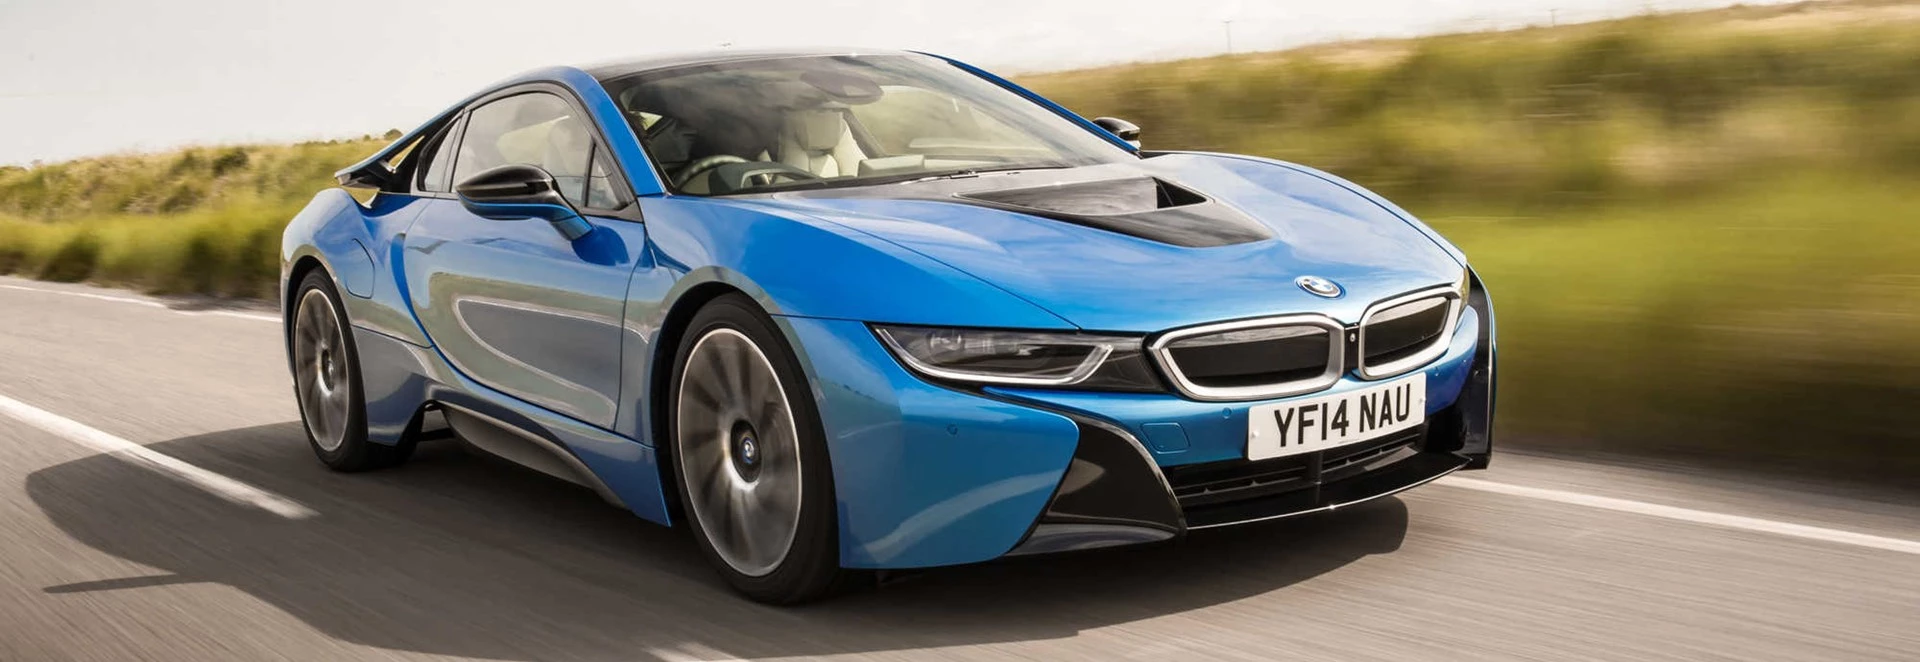 BMW boss hints at more electric models on the way 